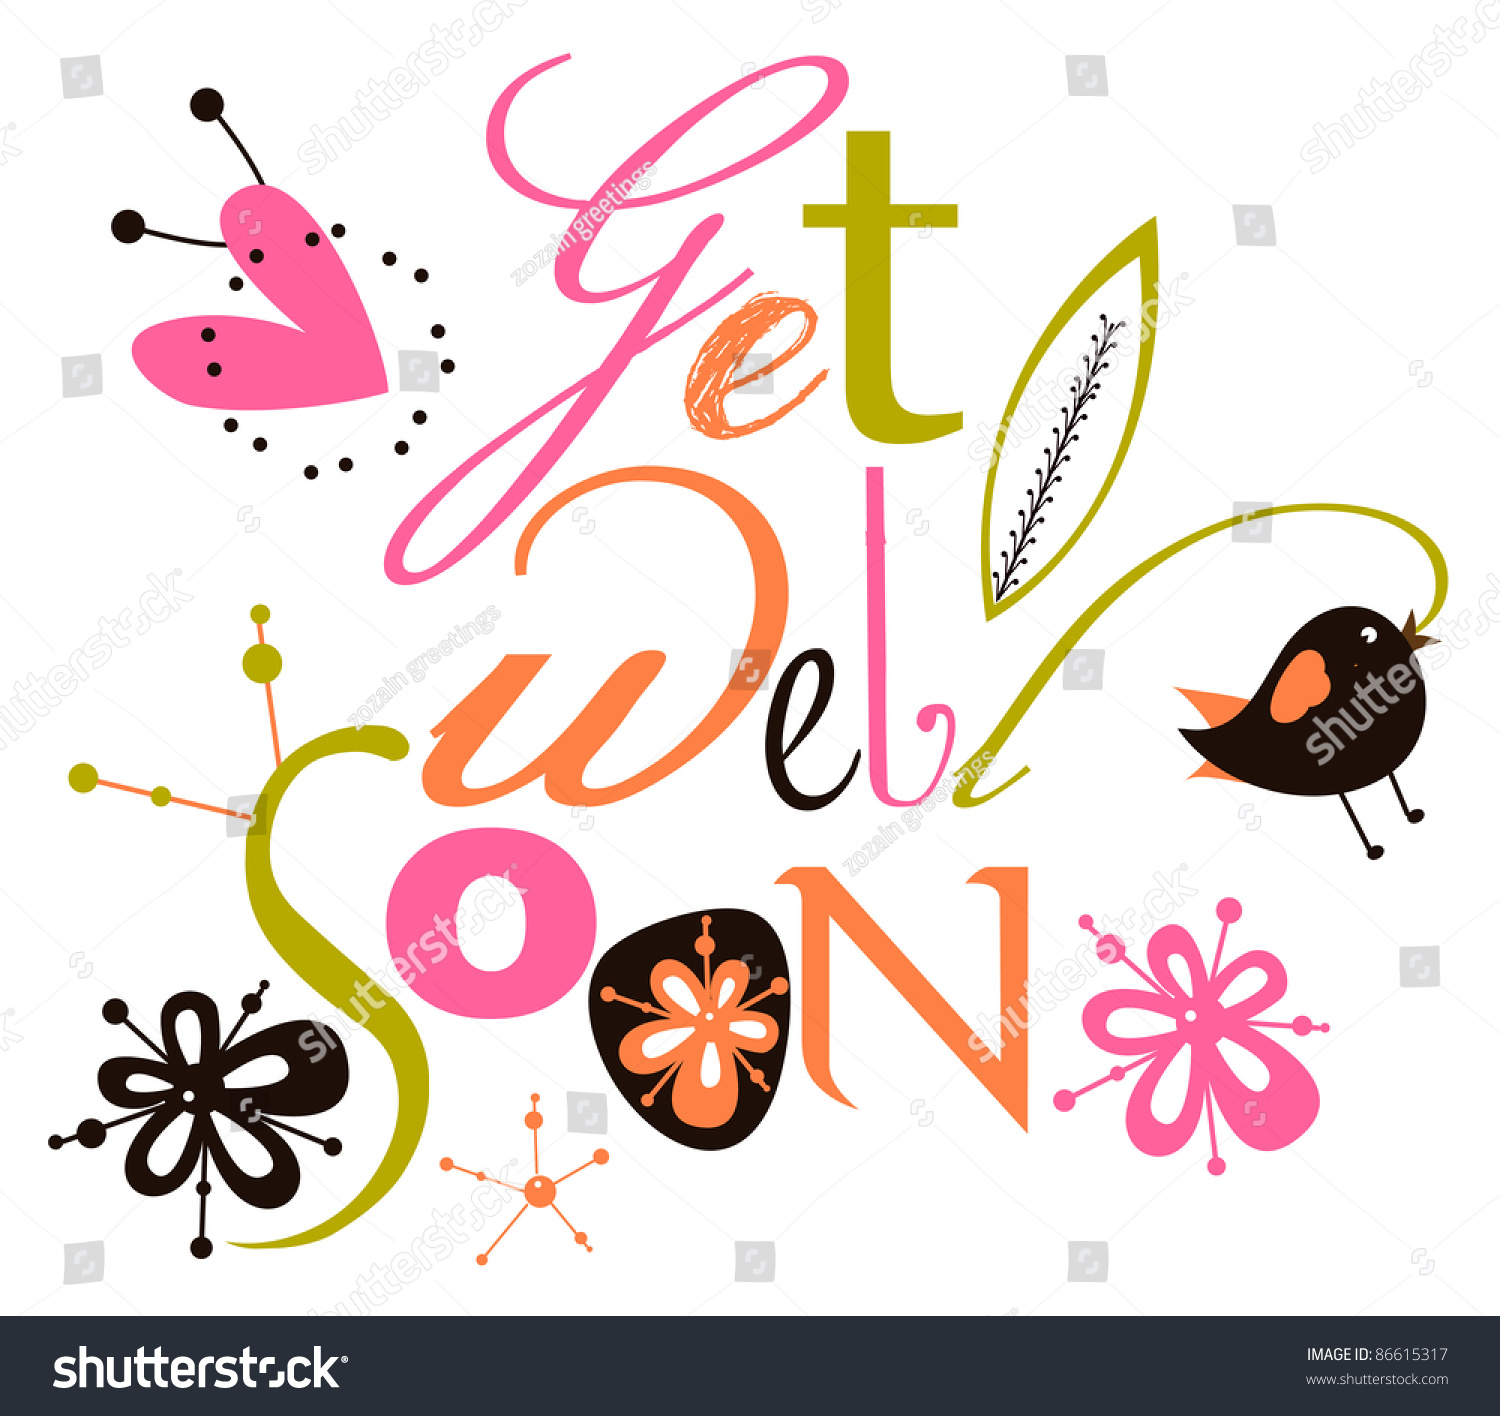 free get well clip art graphics - photo #48